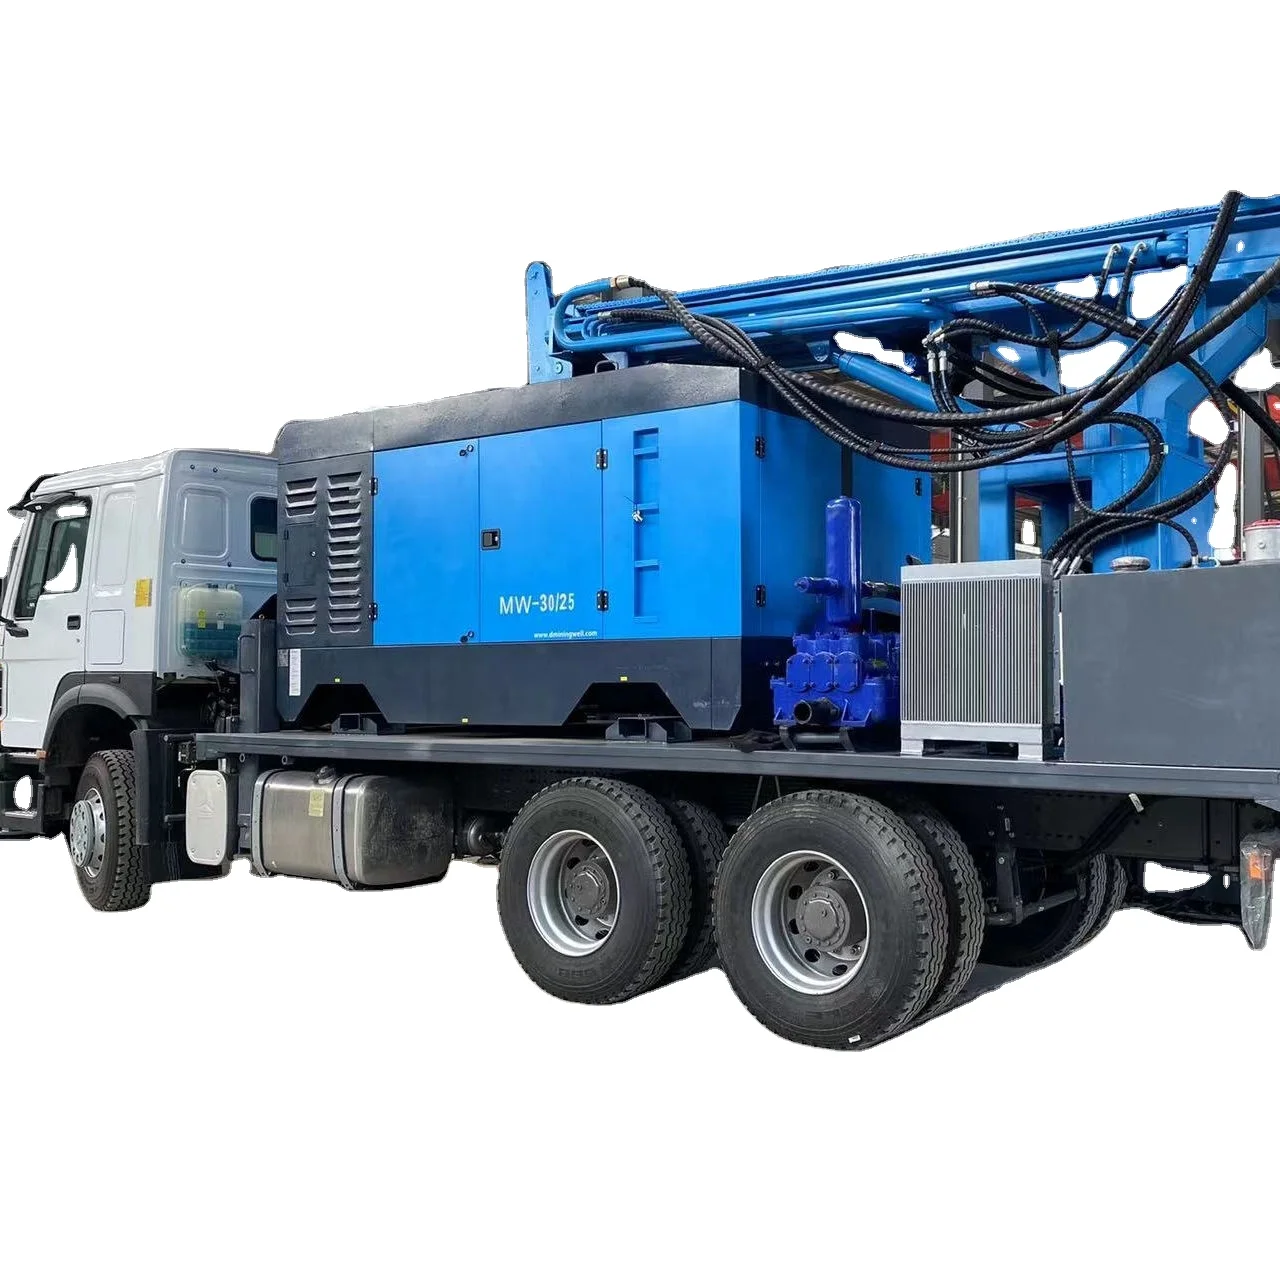 HWH-260 Professional Truck-Mounted Rotary Drilling Machine 260M Depth Water Well Rig for Construction Use